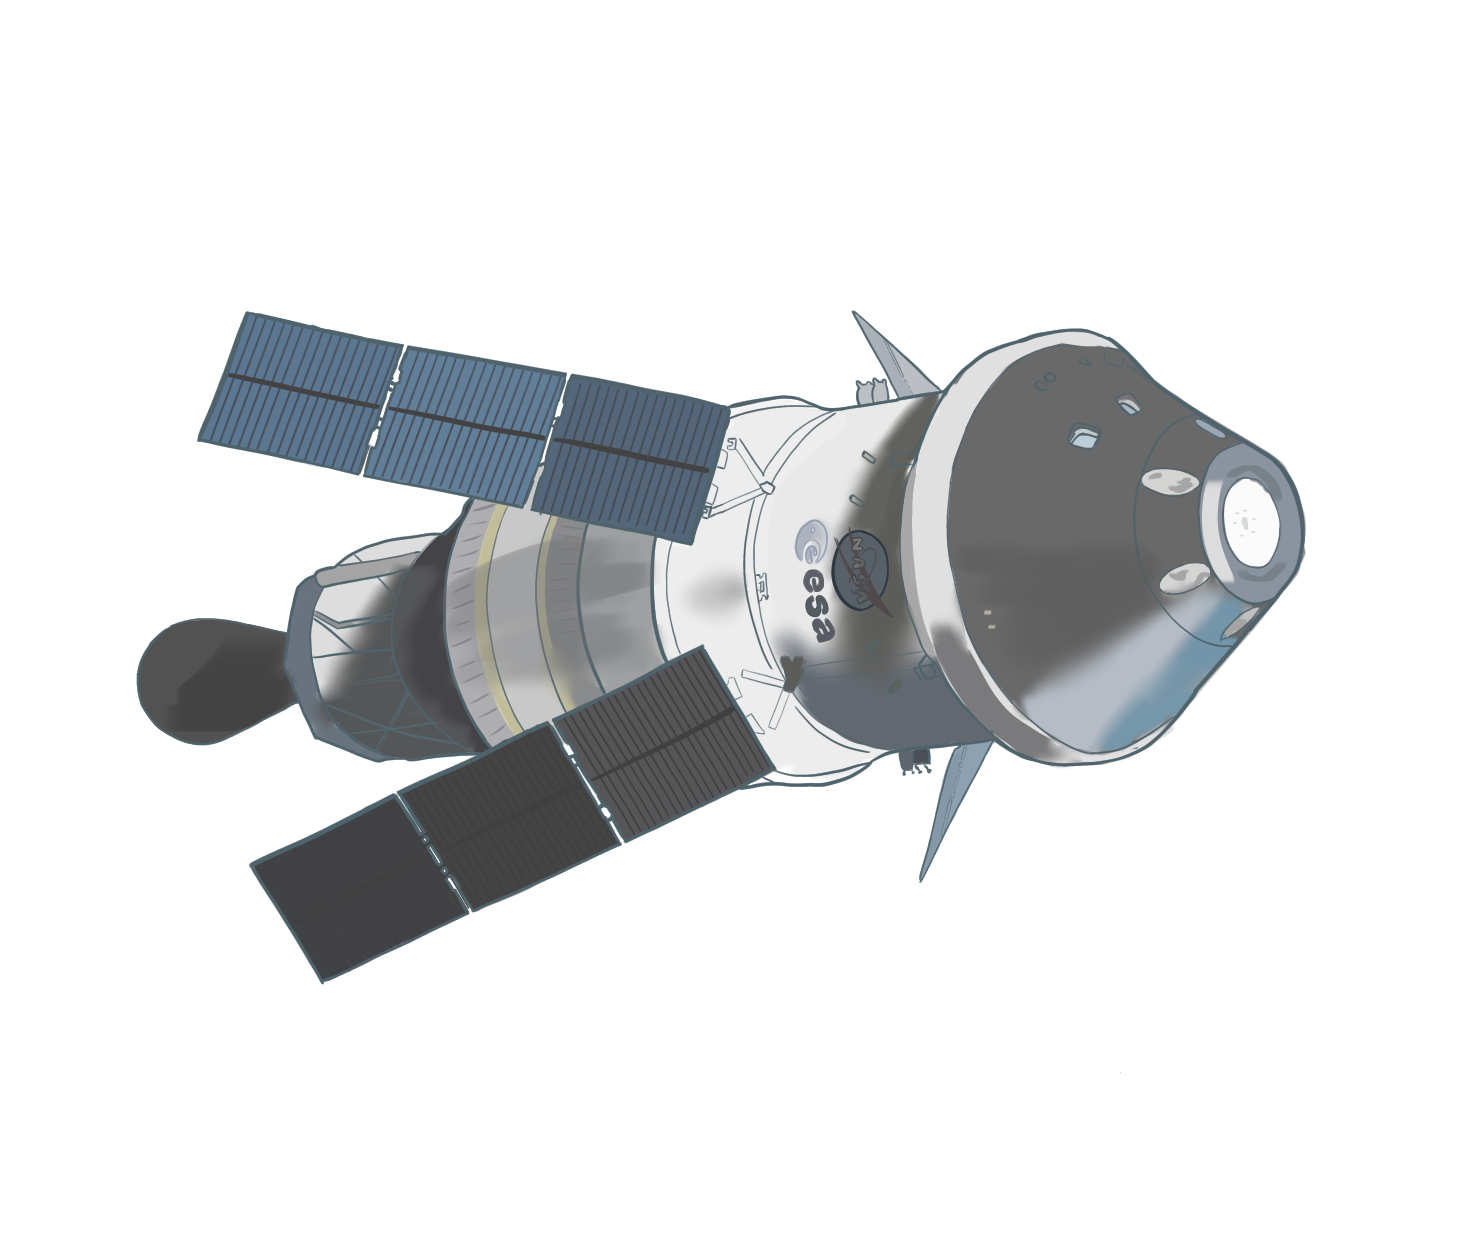 NASA delayed the Artemis II lunar mission to Sept. 2025, stating that pushing out the launch date will allow them to take steps to further improve astronaut safety. This launch is especially significant as it’s the first manned mission to venture beyond low Earth orbit since Apollo 17 in 1972.